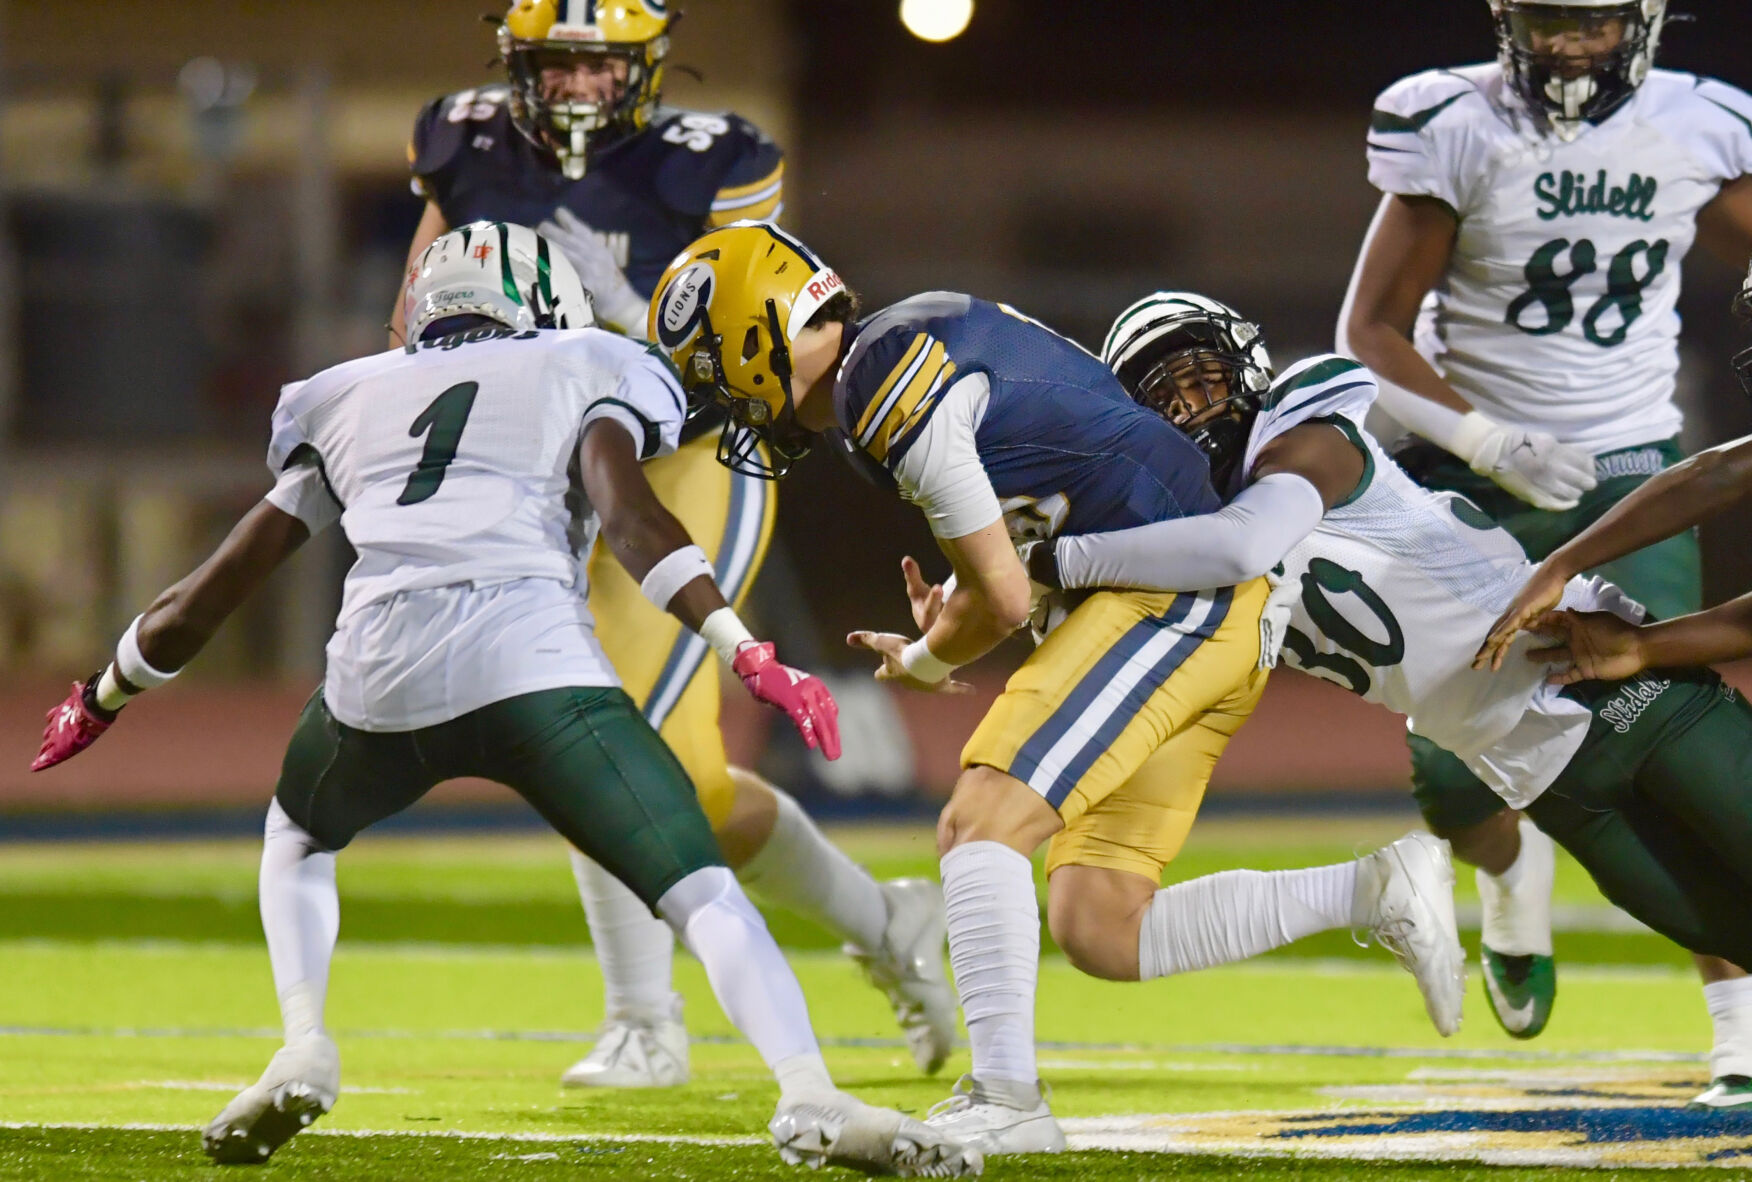 Late defensive scores lift Slidell to a 33-19 victory over Covington in District 6-5A clash